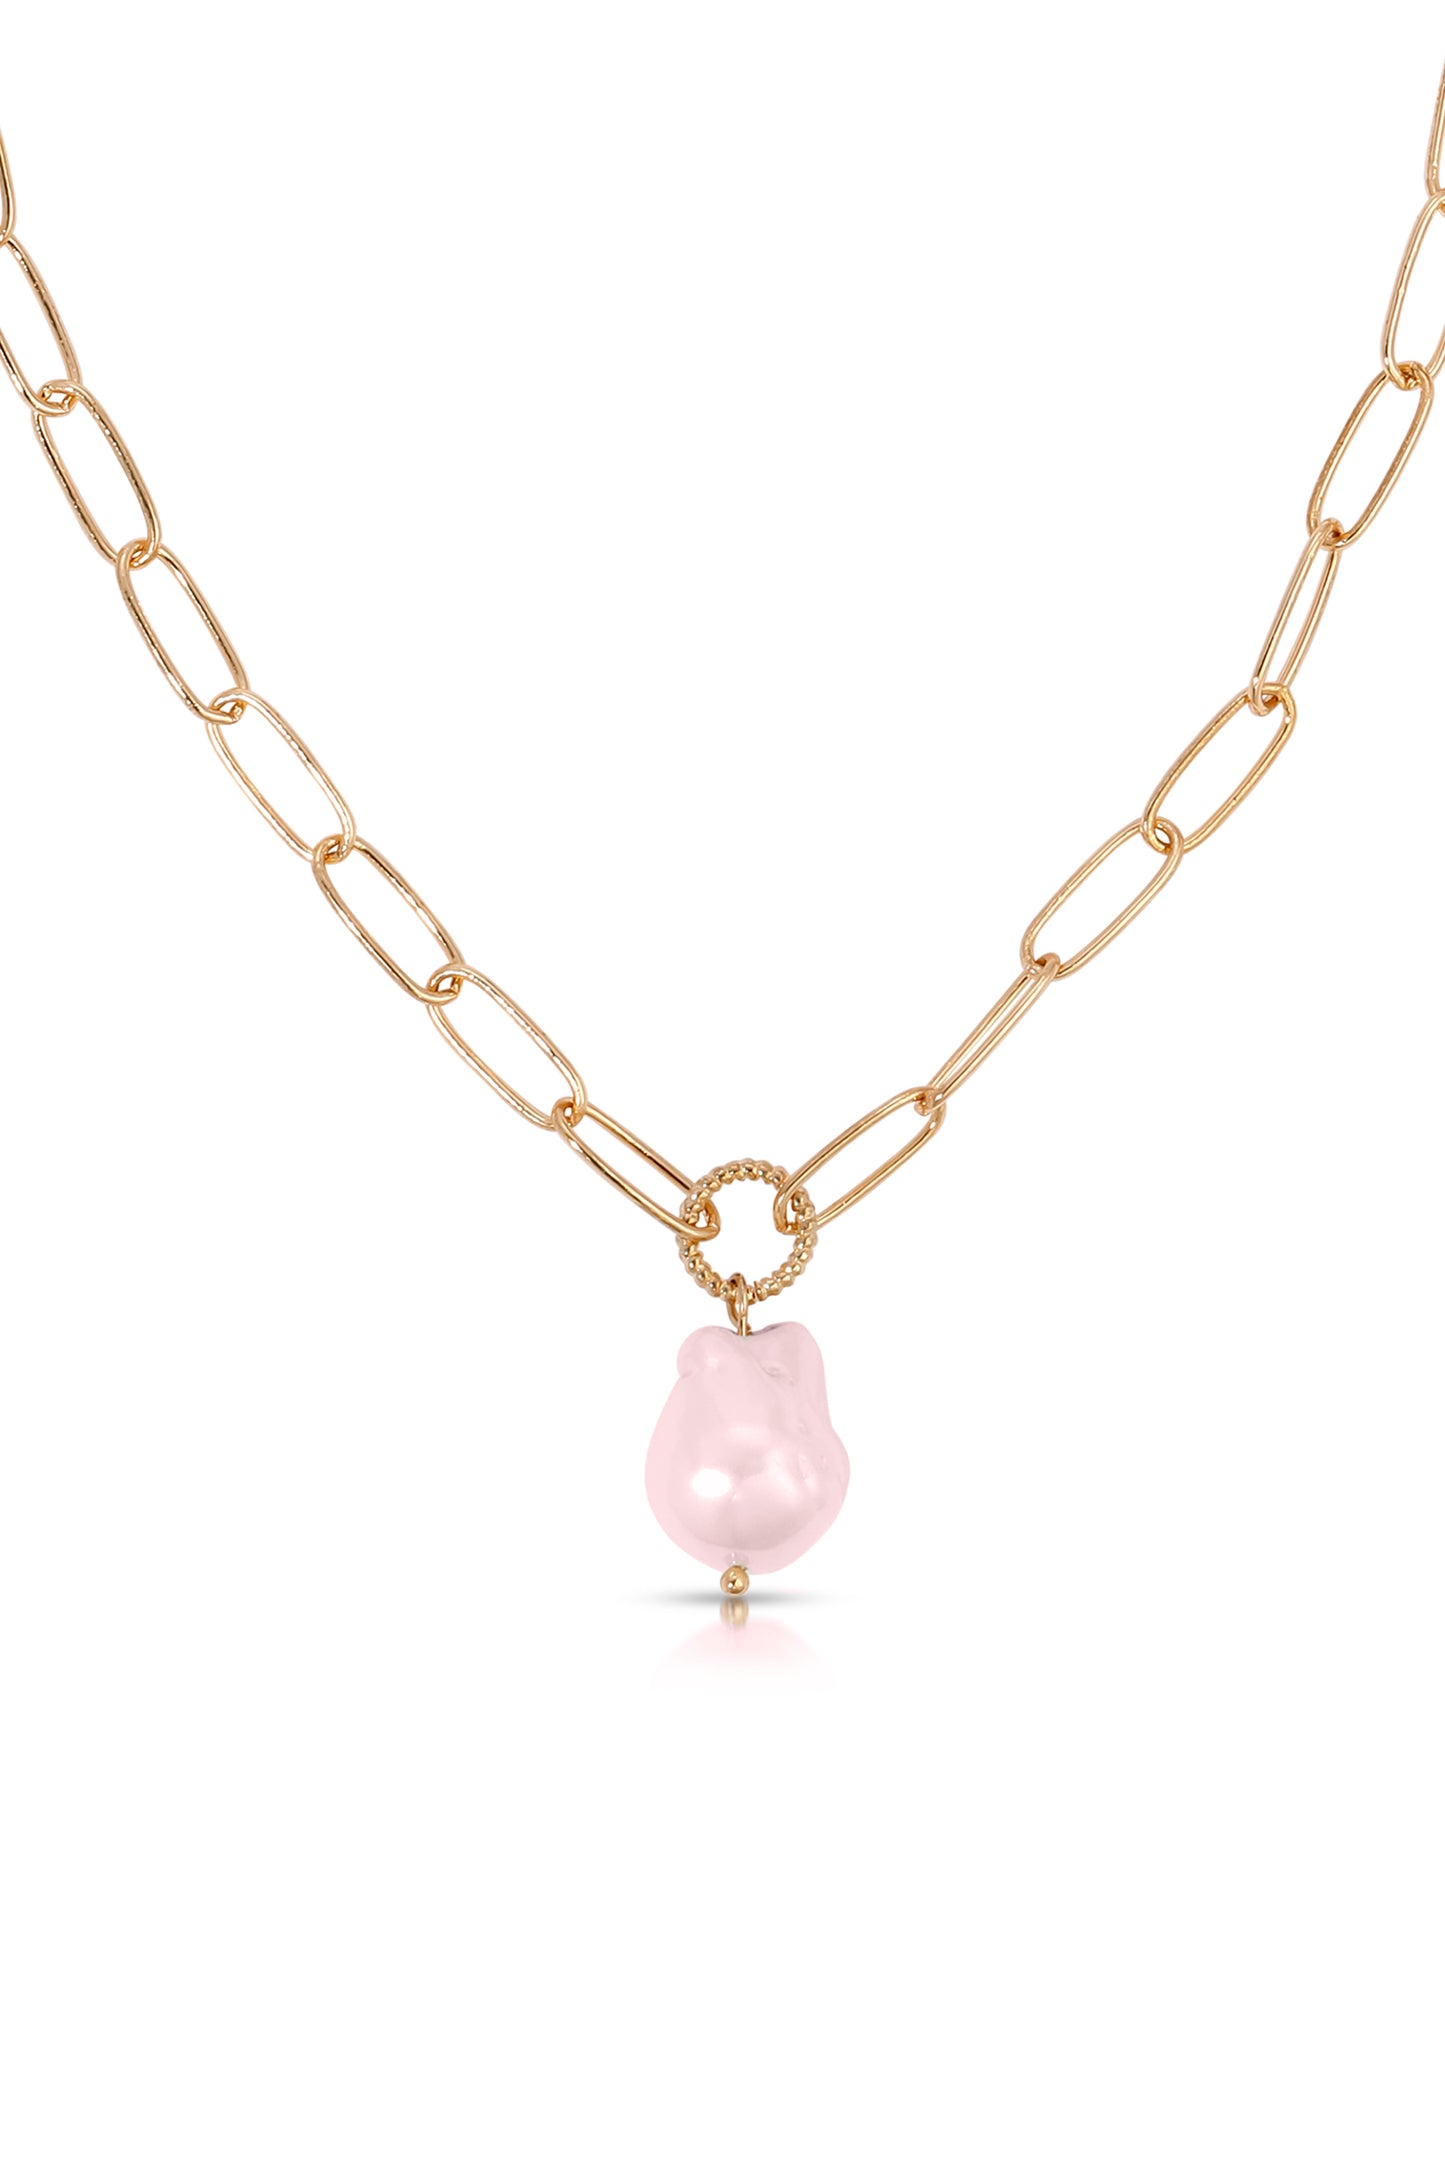 Single Pearl Open Links 18k Gold Plated Chain Necklace in pink pearl close up